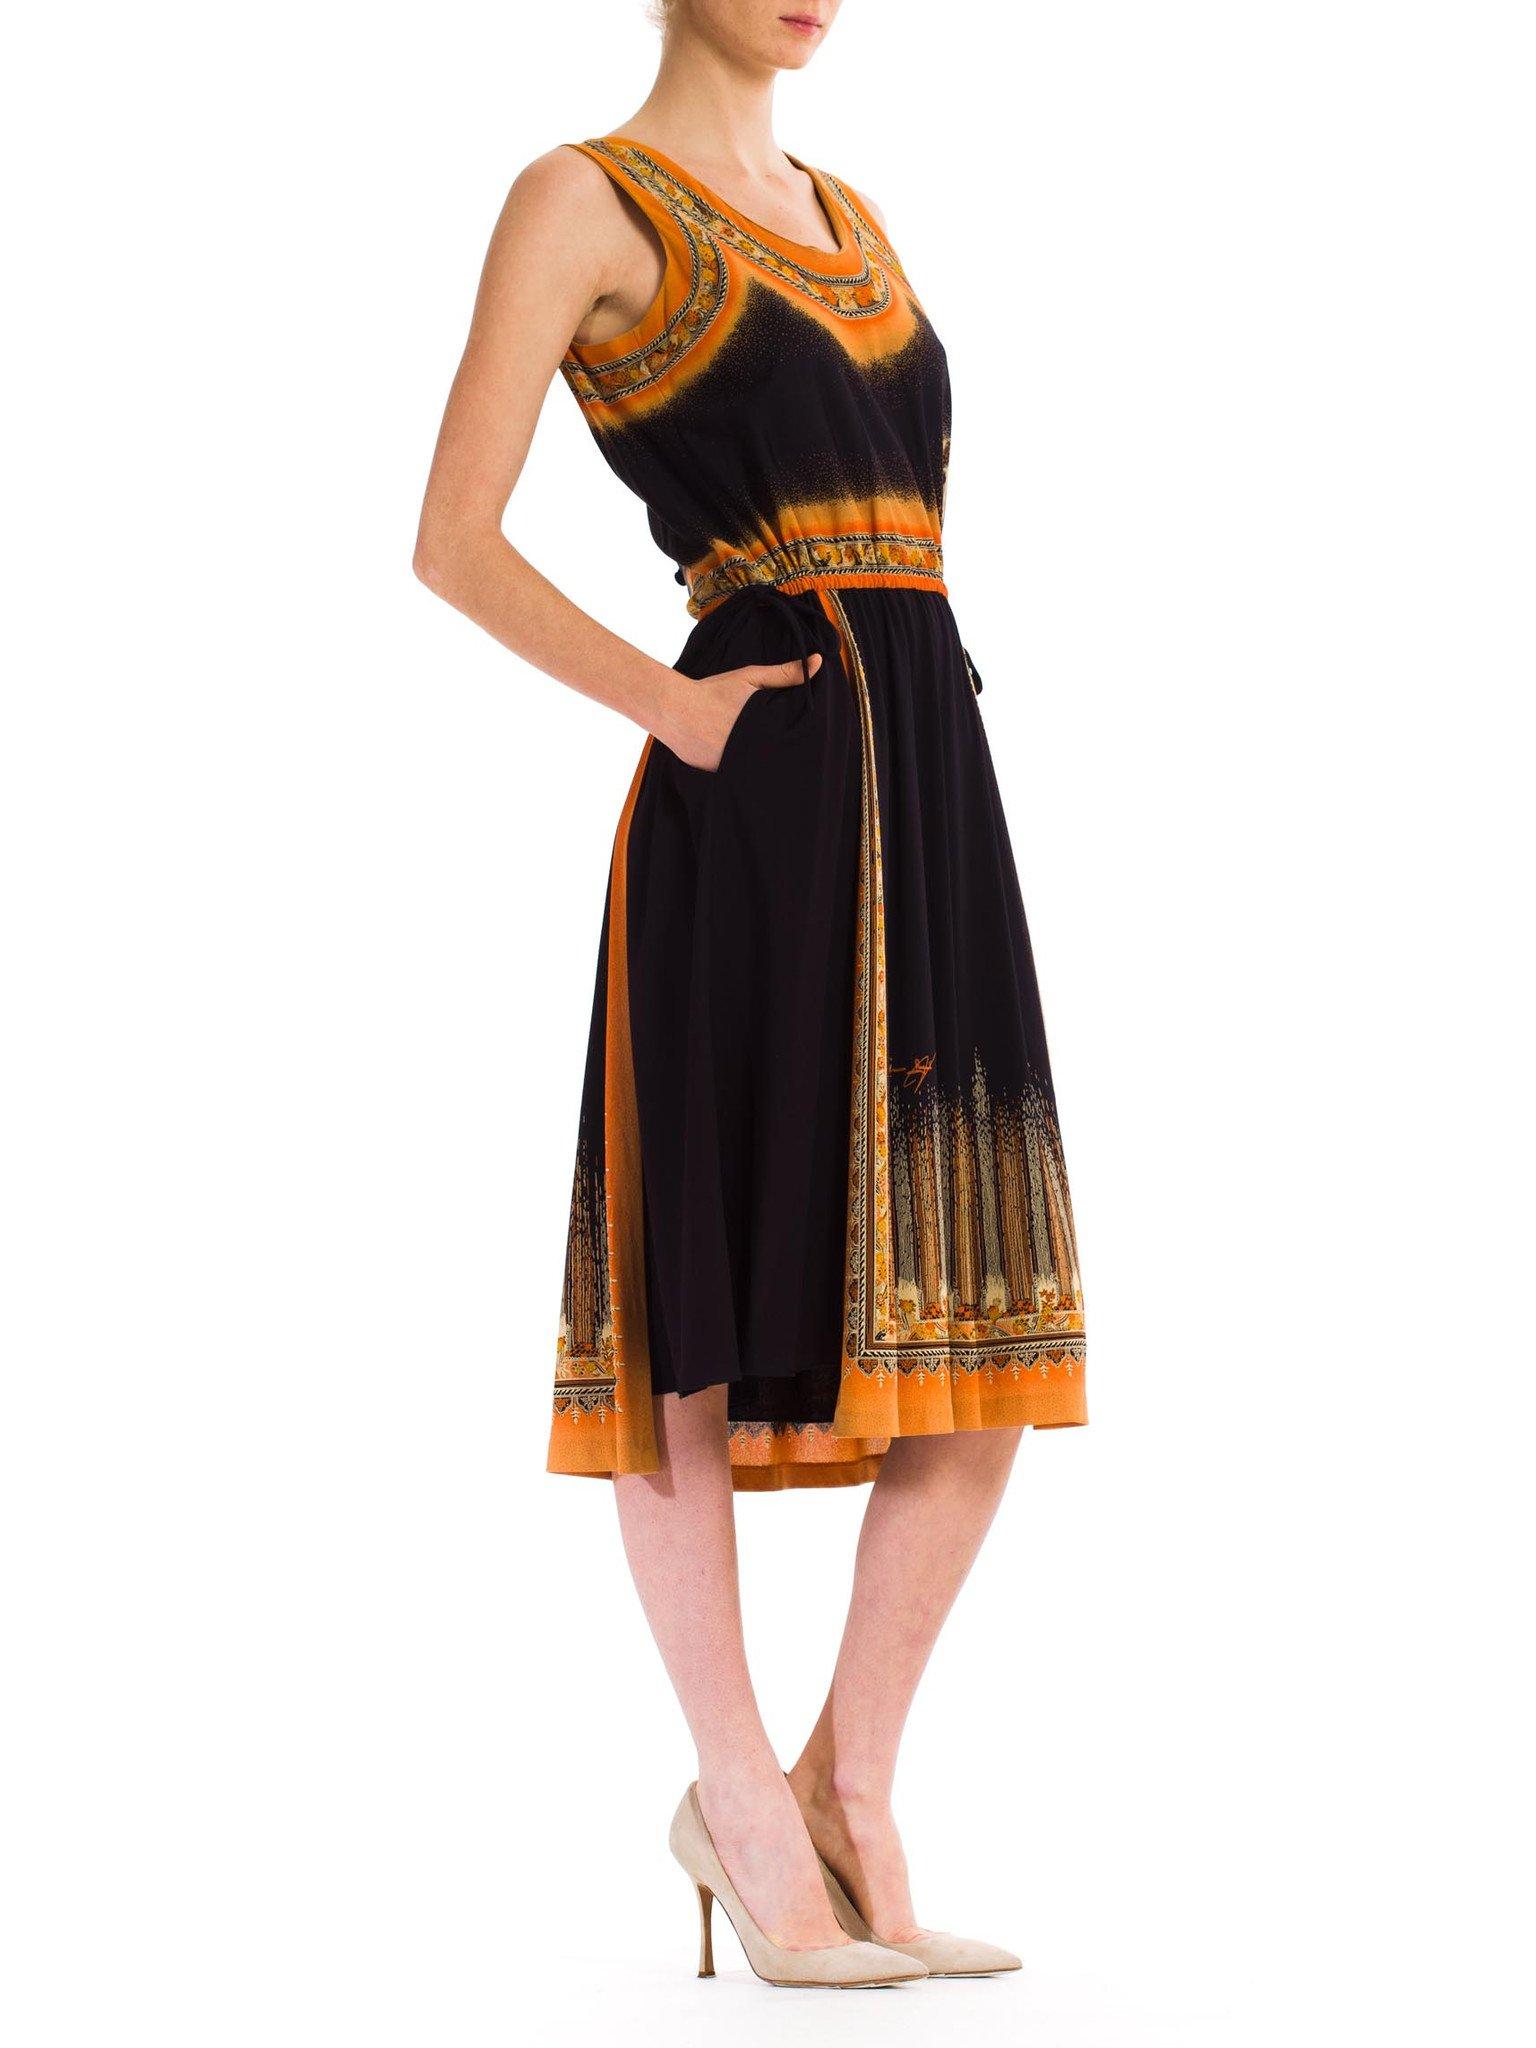 Women's 1970S Art Deco Acetate Jersey Dress Made In Italy